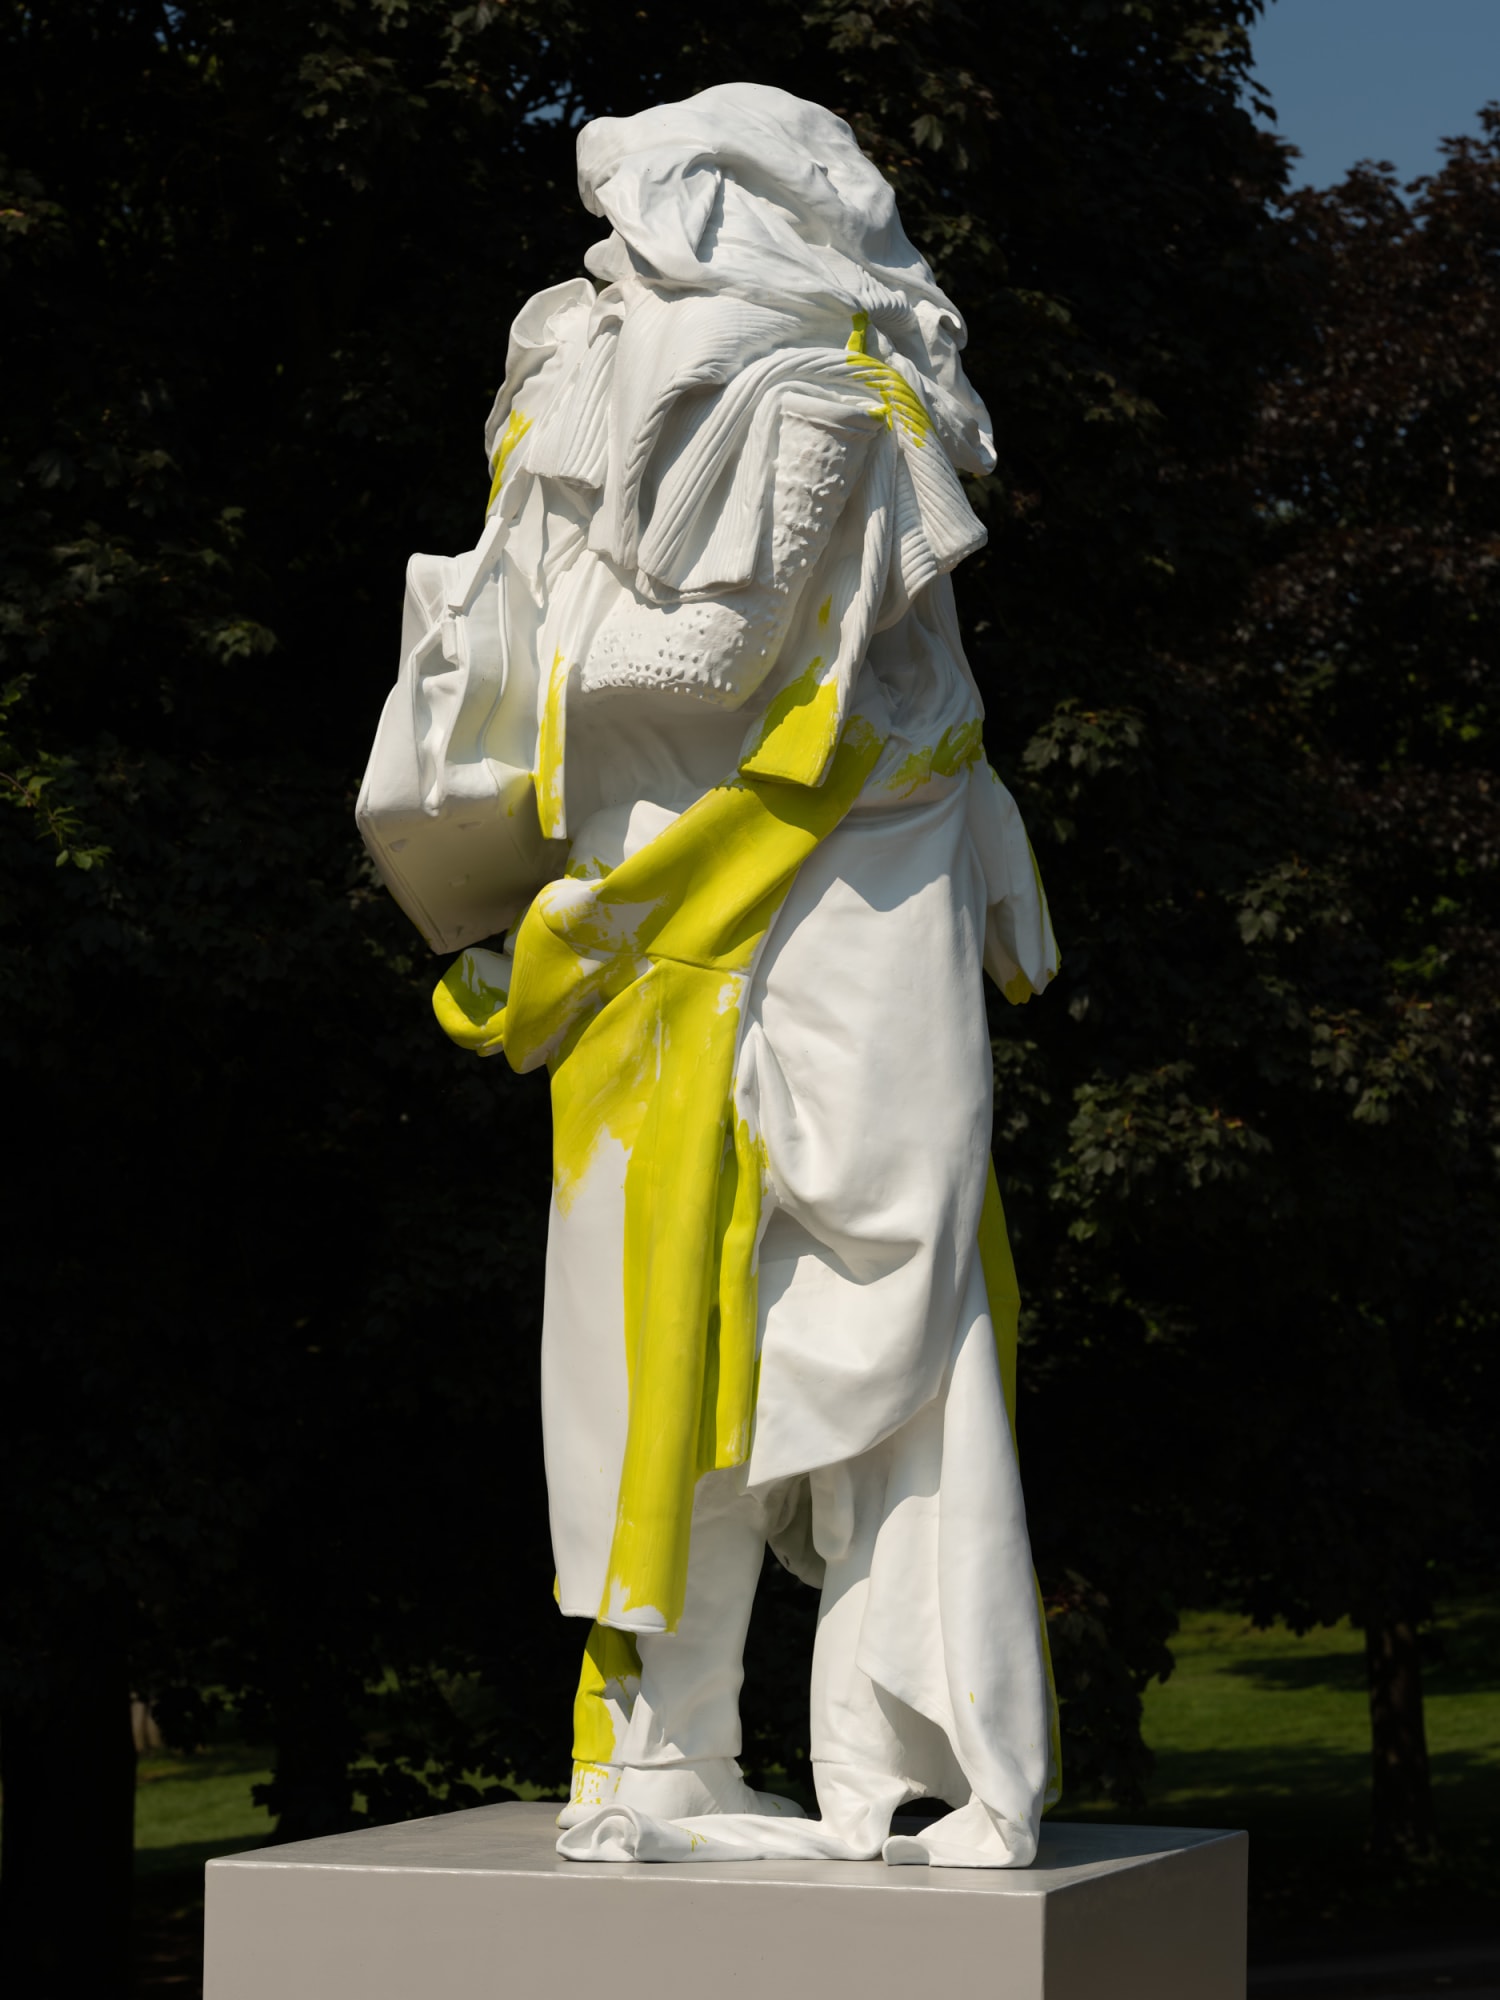 Erwin Wurm gift to Yorkshire Sculpture Park Wurm's sculpture Balzac is gifted to Yorkshire Sculpture Park